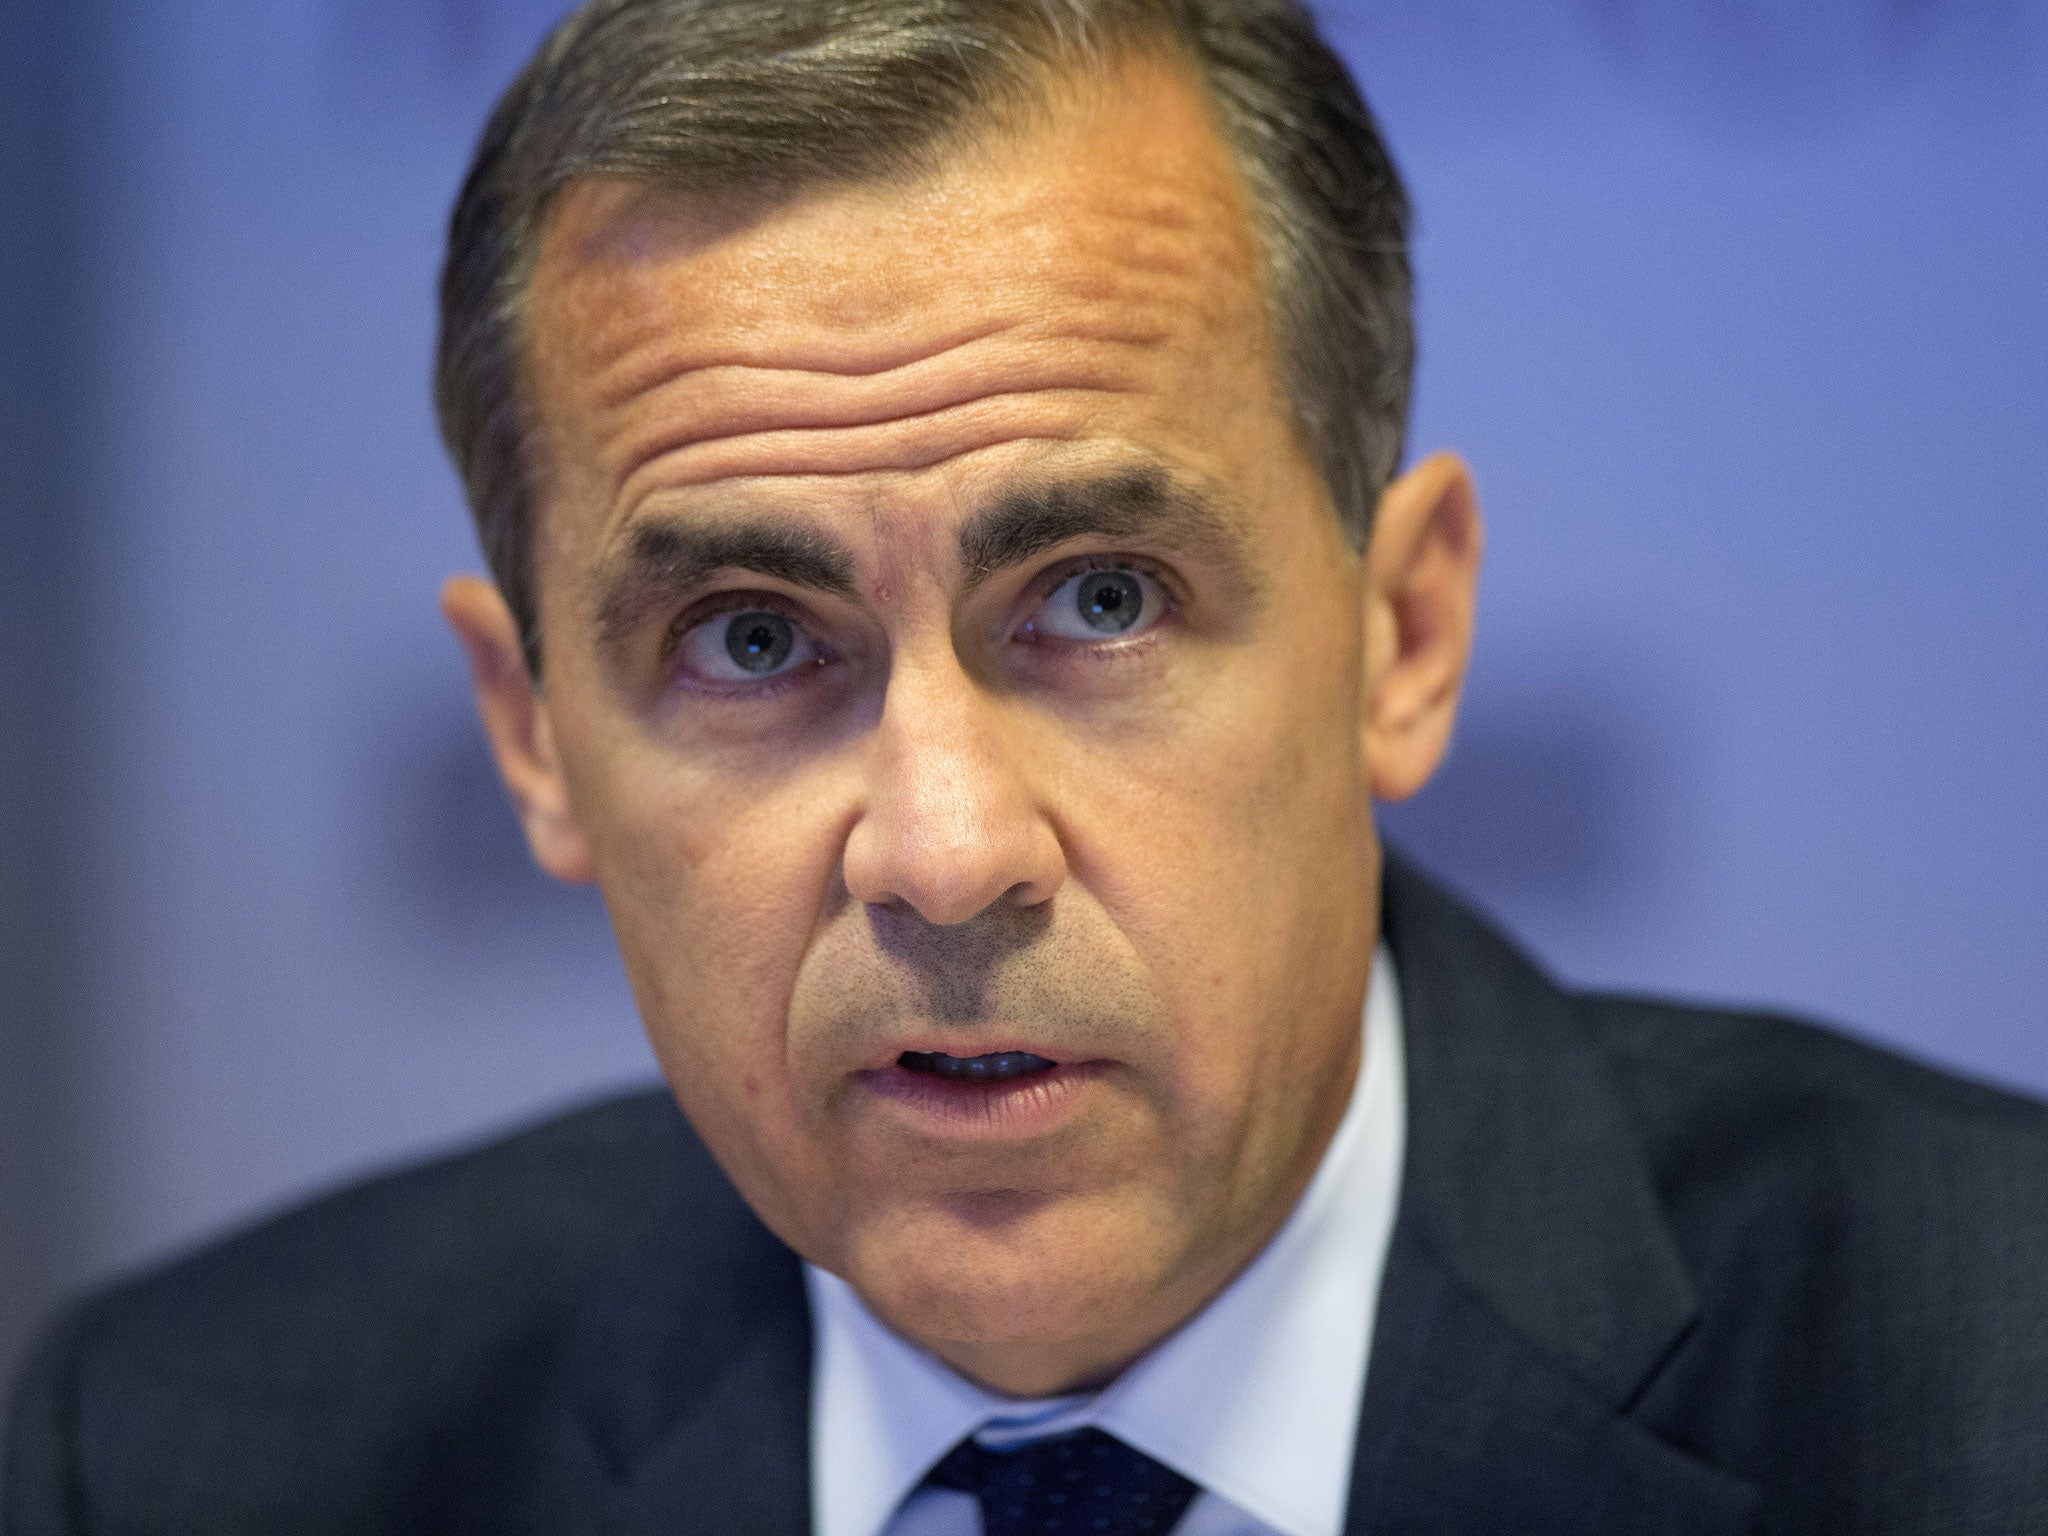 Bank of England Governor Mark Carney was forced to defend forward guidance against criticism that the policy is ineffective.